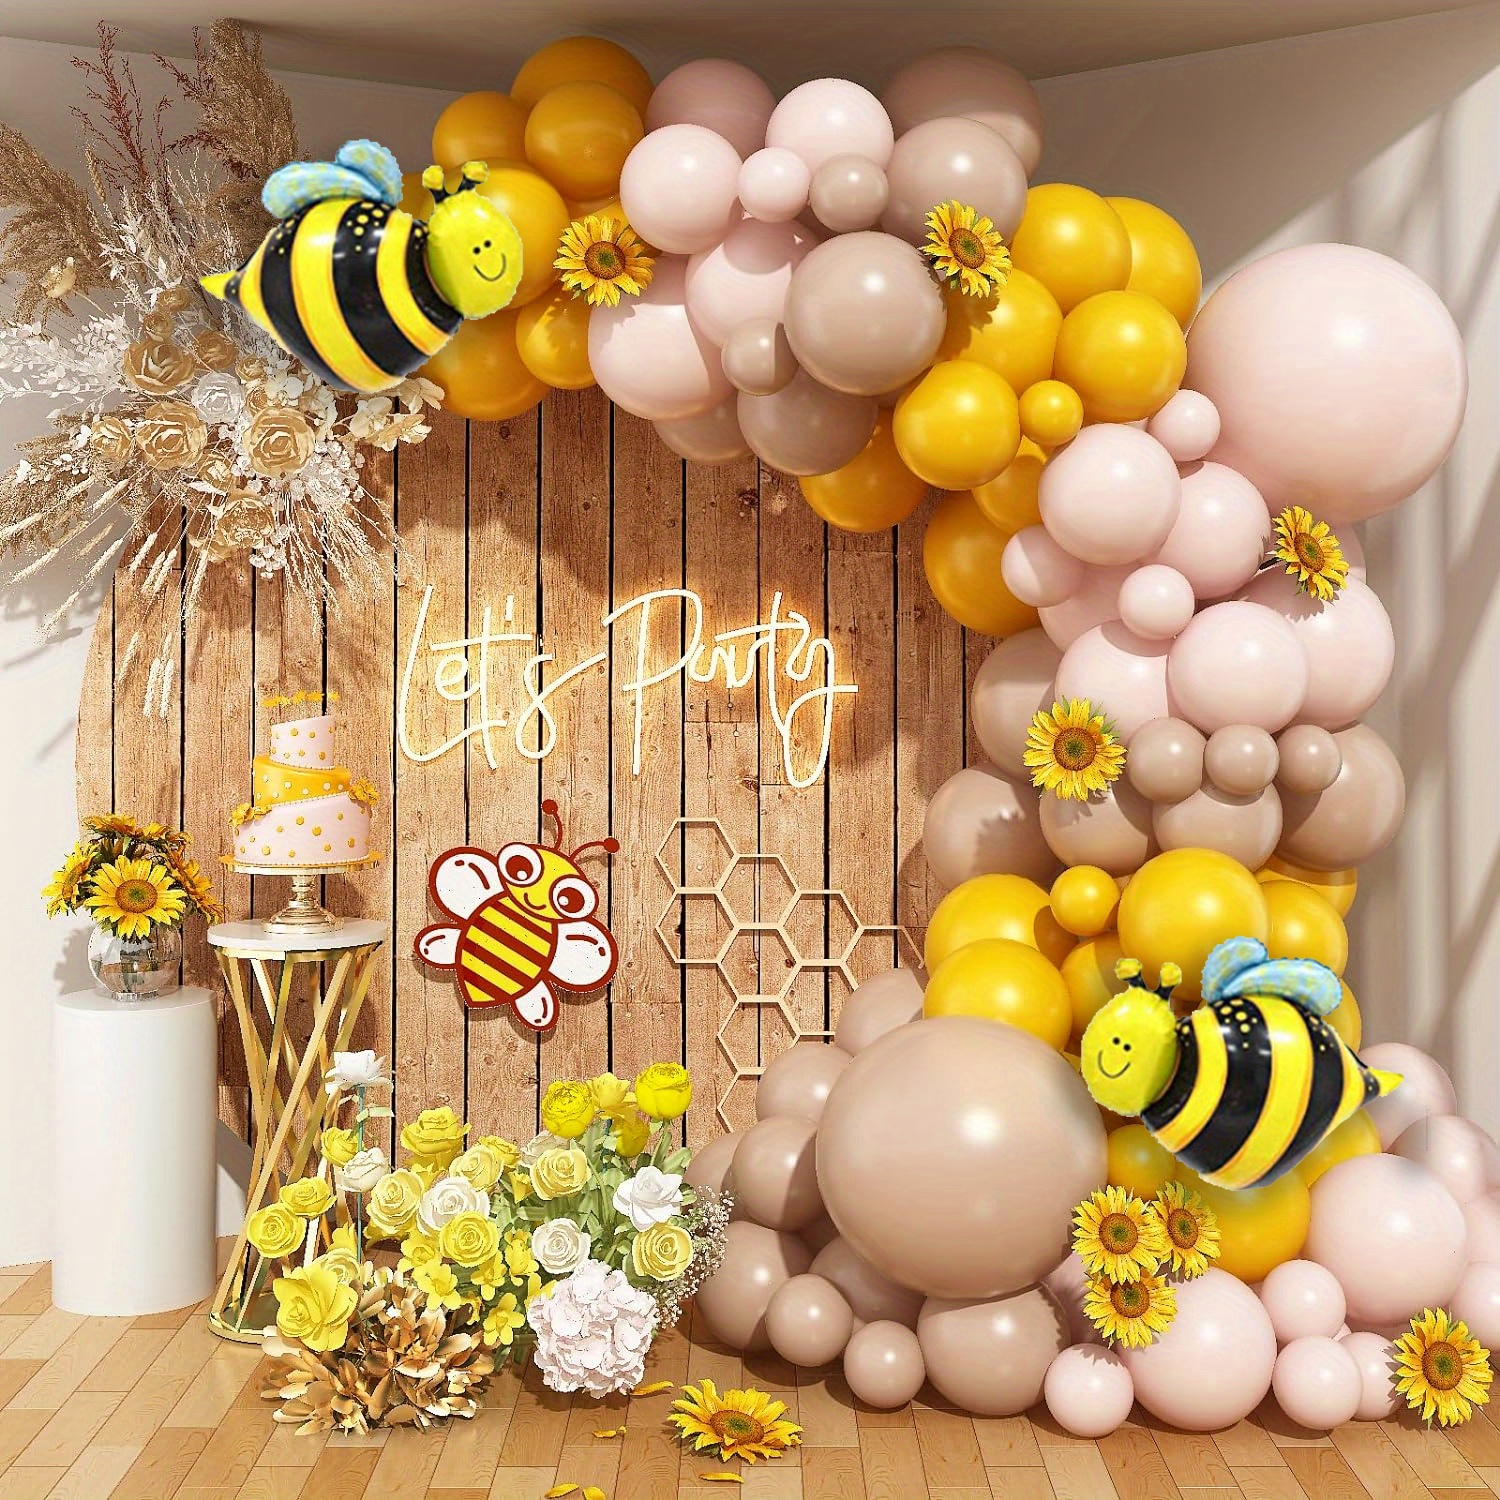 Honey Bee Party Decorations, Bumble Bee Baby Shower Hanging Paper Fans  Lanterns Tissue Honeycomb Ball Glitter Circle Dot Garland Black and Yellow  for